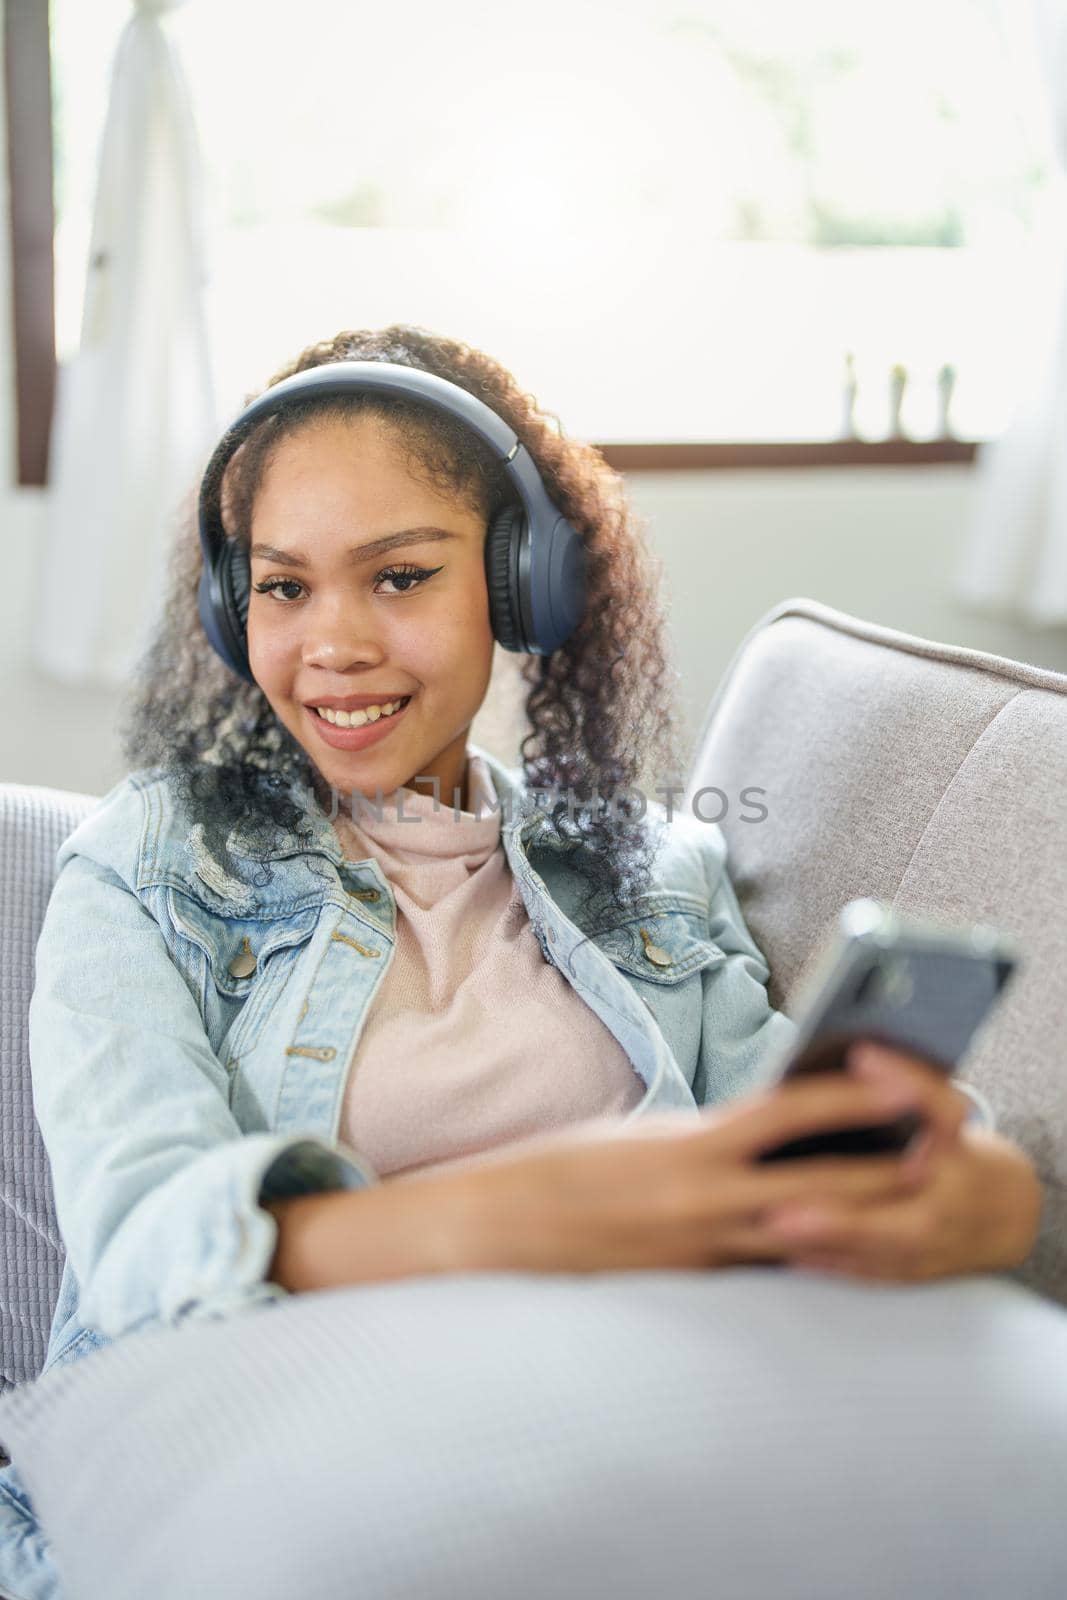 Portrait of an African American sitting on a sofa using a phone and wearing headphones to relax by Manastrong